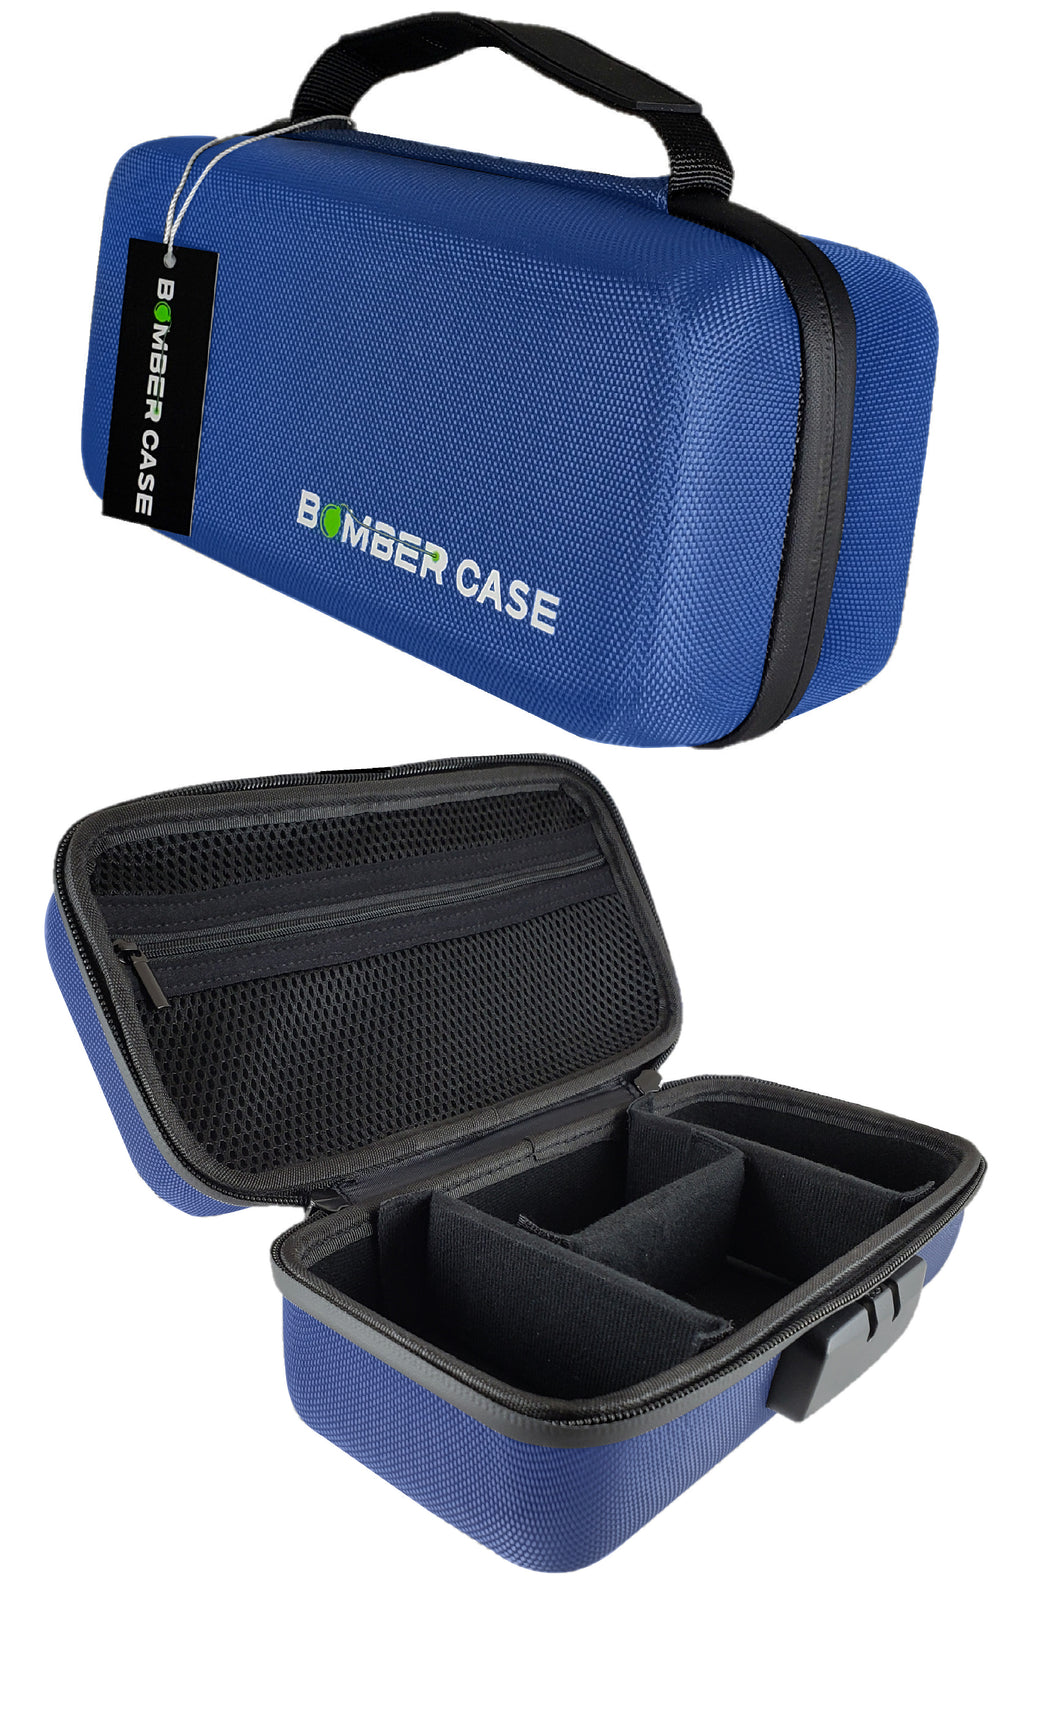 BOMBER CASE - Combination Lock Box - Smell Proof Stash Case - Customizable Padded Interior - Flexible Construction and Odor Proof Locking Zipper - Safe Container - 9.5